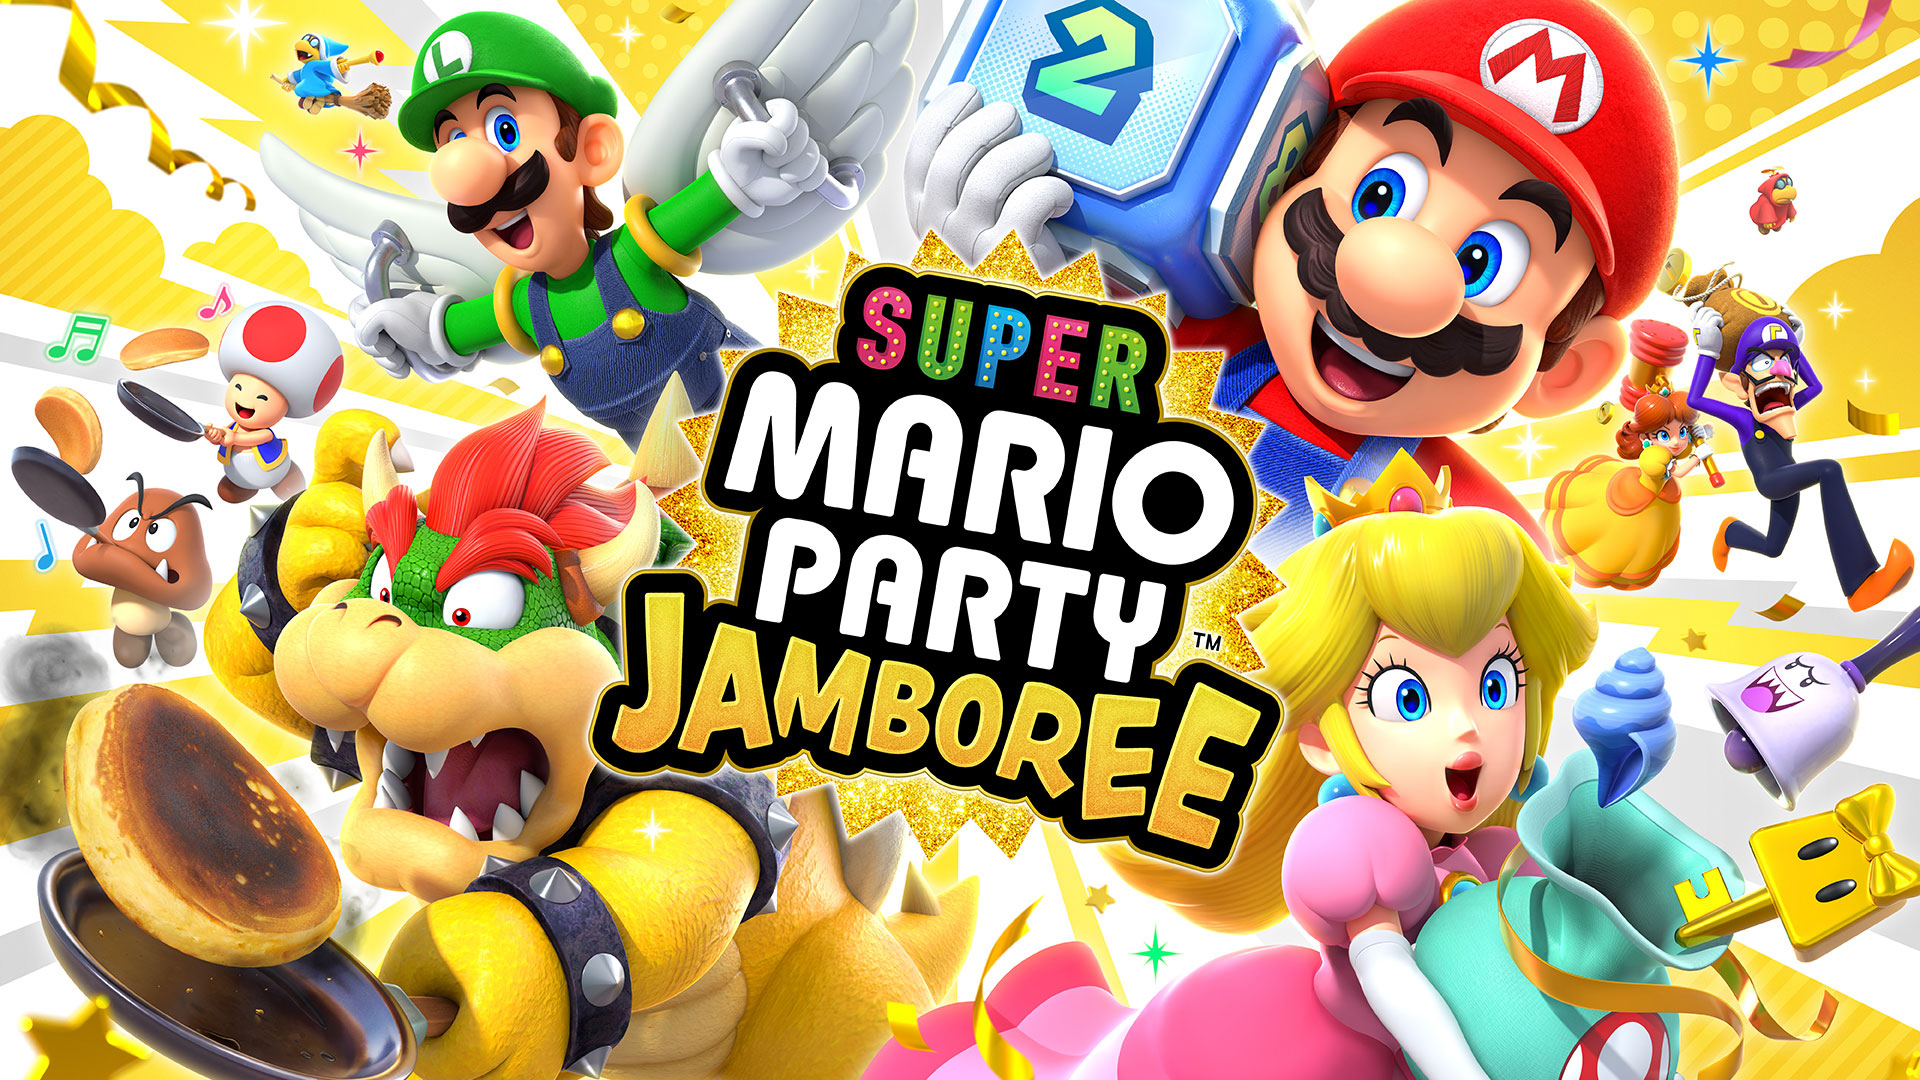 Super Mario Party Jamboree launches October 17 on the Nintendo Switch